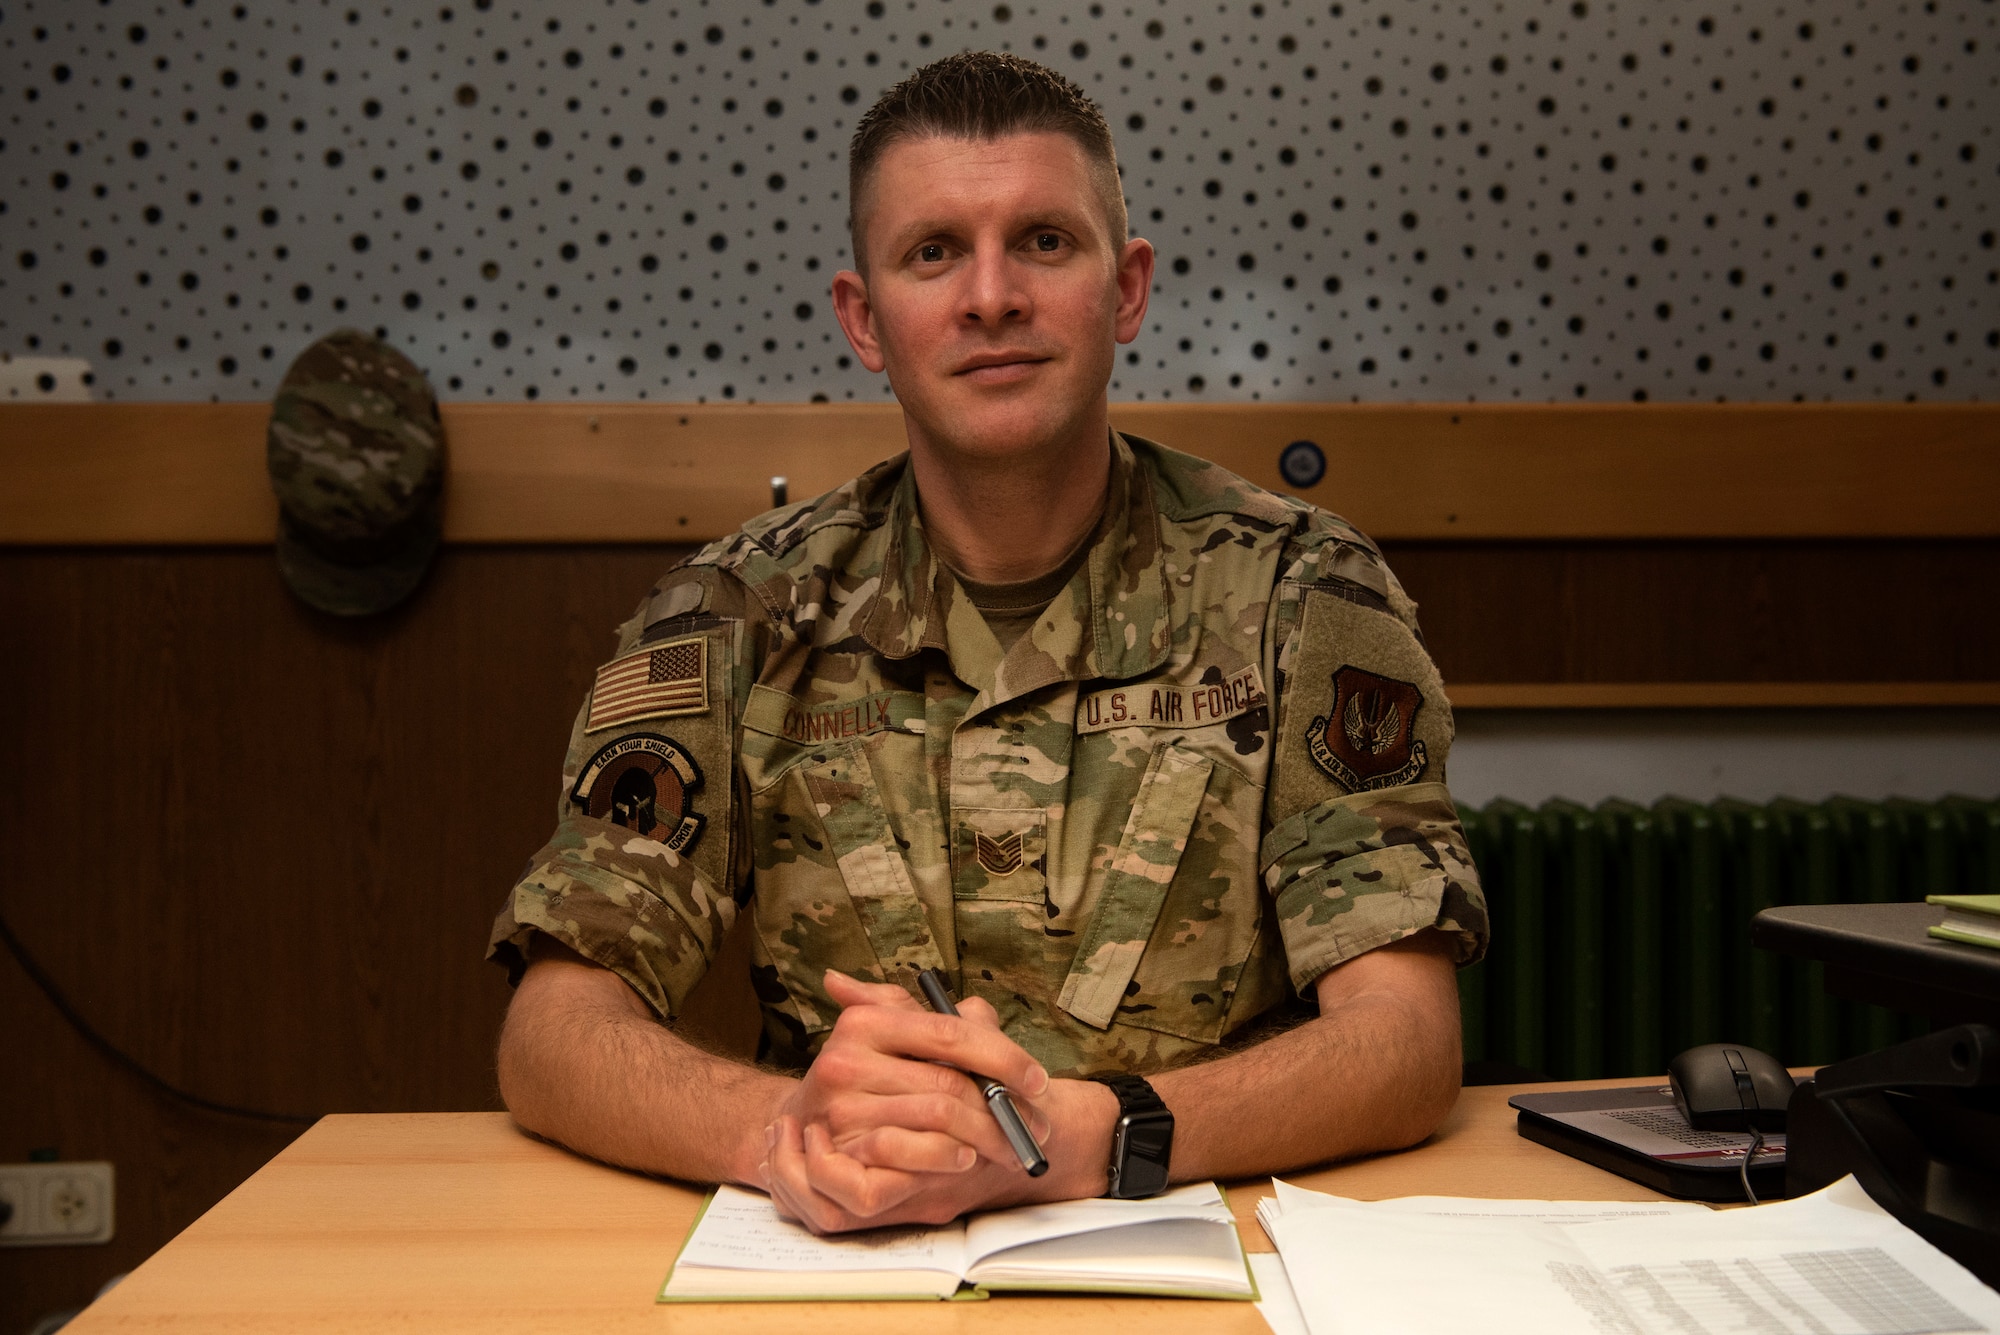 U.S. Air Force Tech. Sgt. Matthew Connelly, 52nd Maintenance Squadron precision-guided munitions production supervisor, poses for a photo at Spangdahlem Air Base, Germany, Nov. 19, 2019. Connelly is also a 52nd Fighter Wing Innovation and Transformation Office continual process improvement instructor. Although he works in maintenance, his passion is teaching process improvement classes and helping better the Air Force through innovation. (U.S. Air Force photo by Airman 1st Class Valerie Seelye)